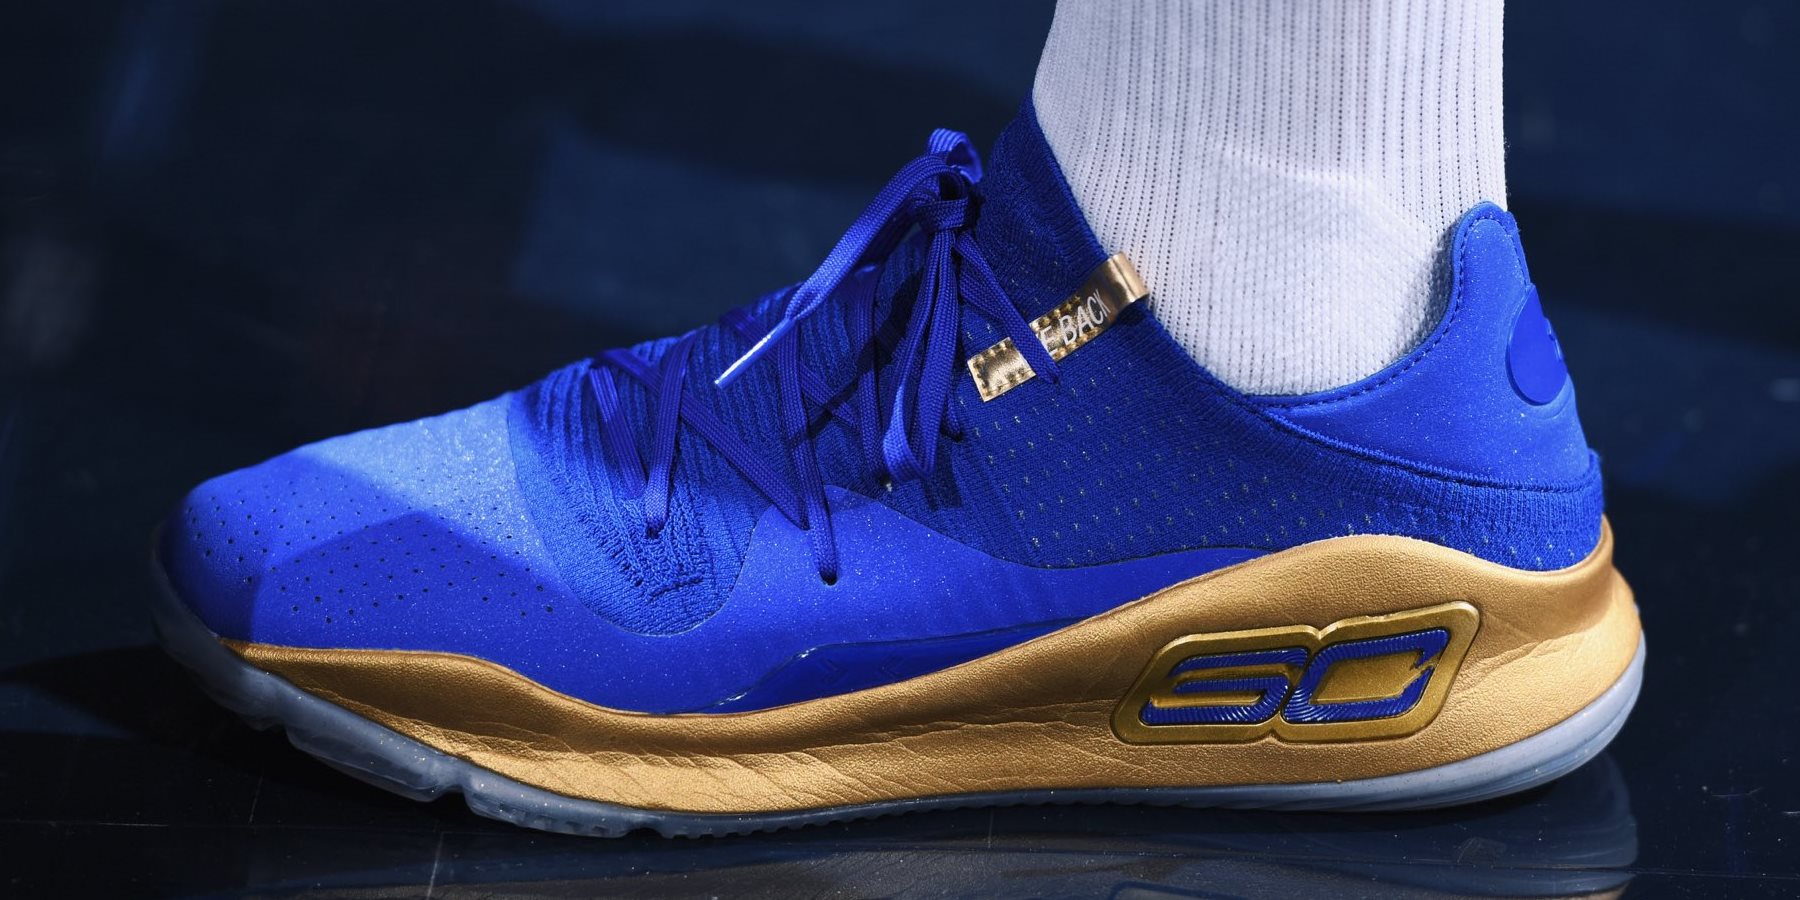 curry 4 low top